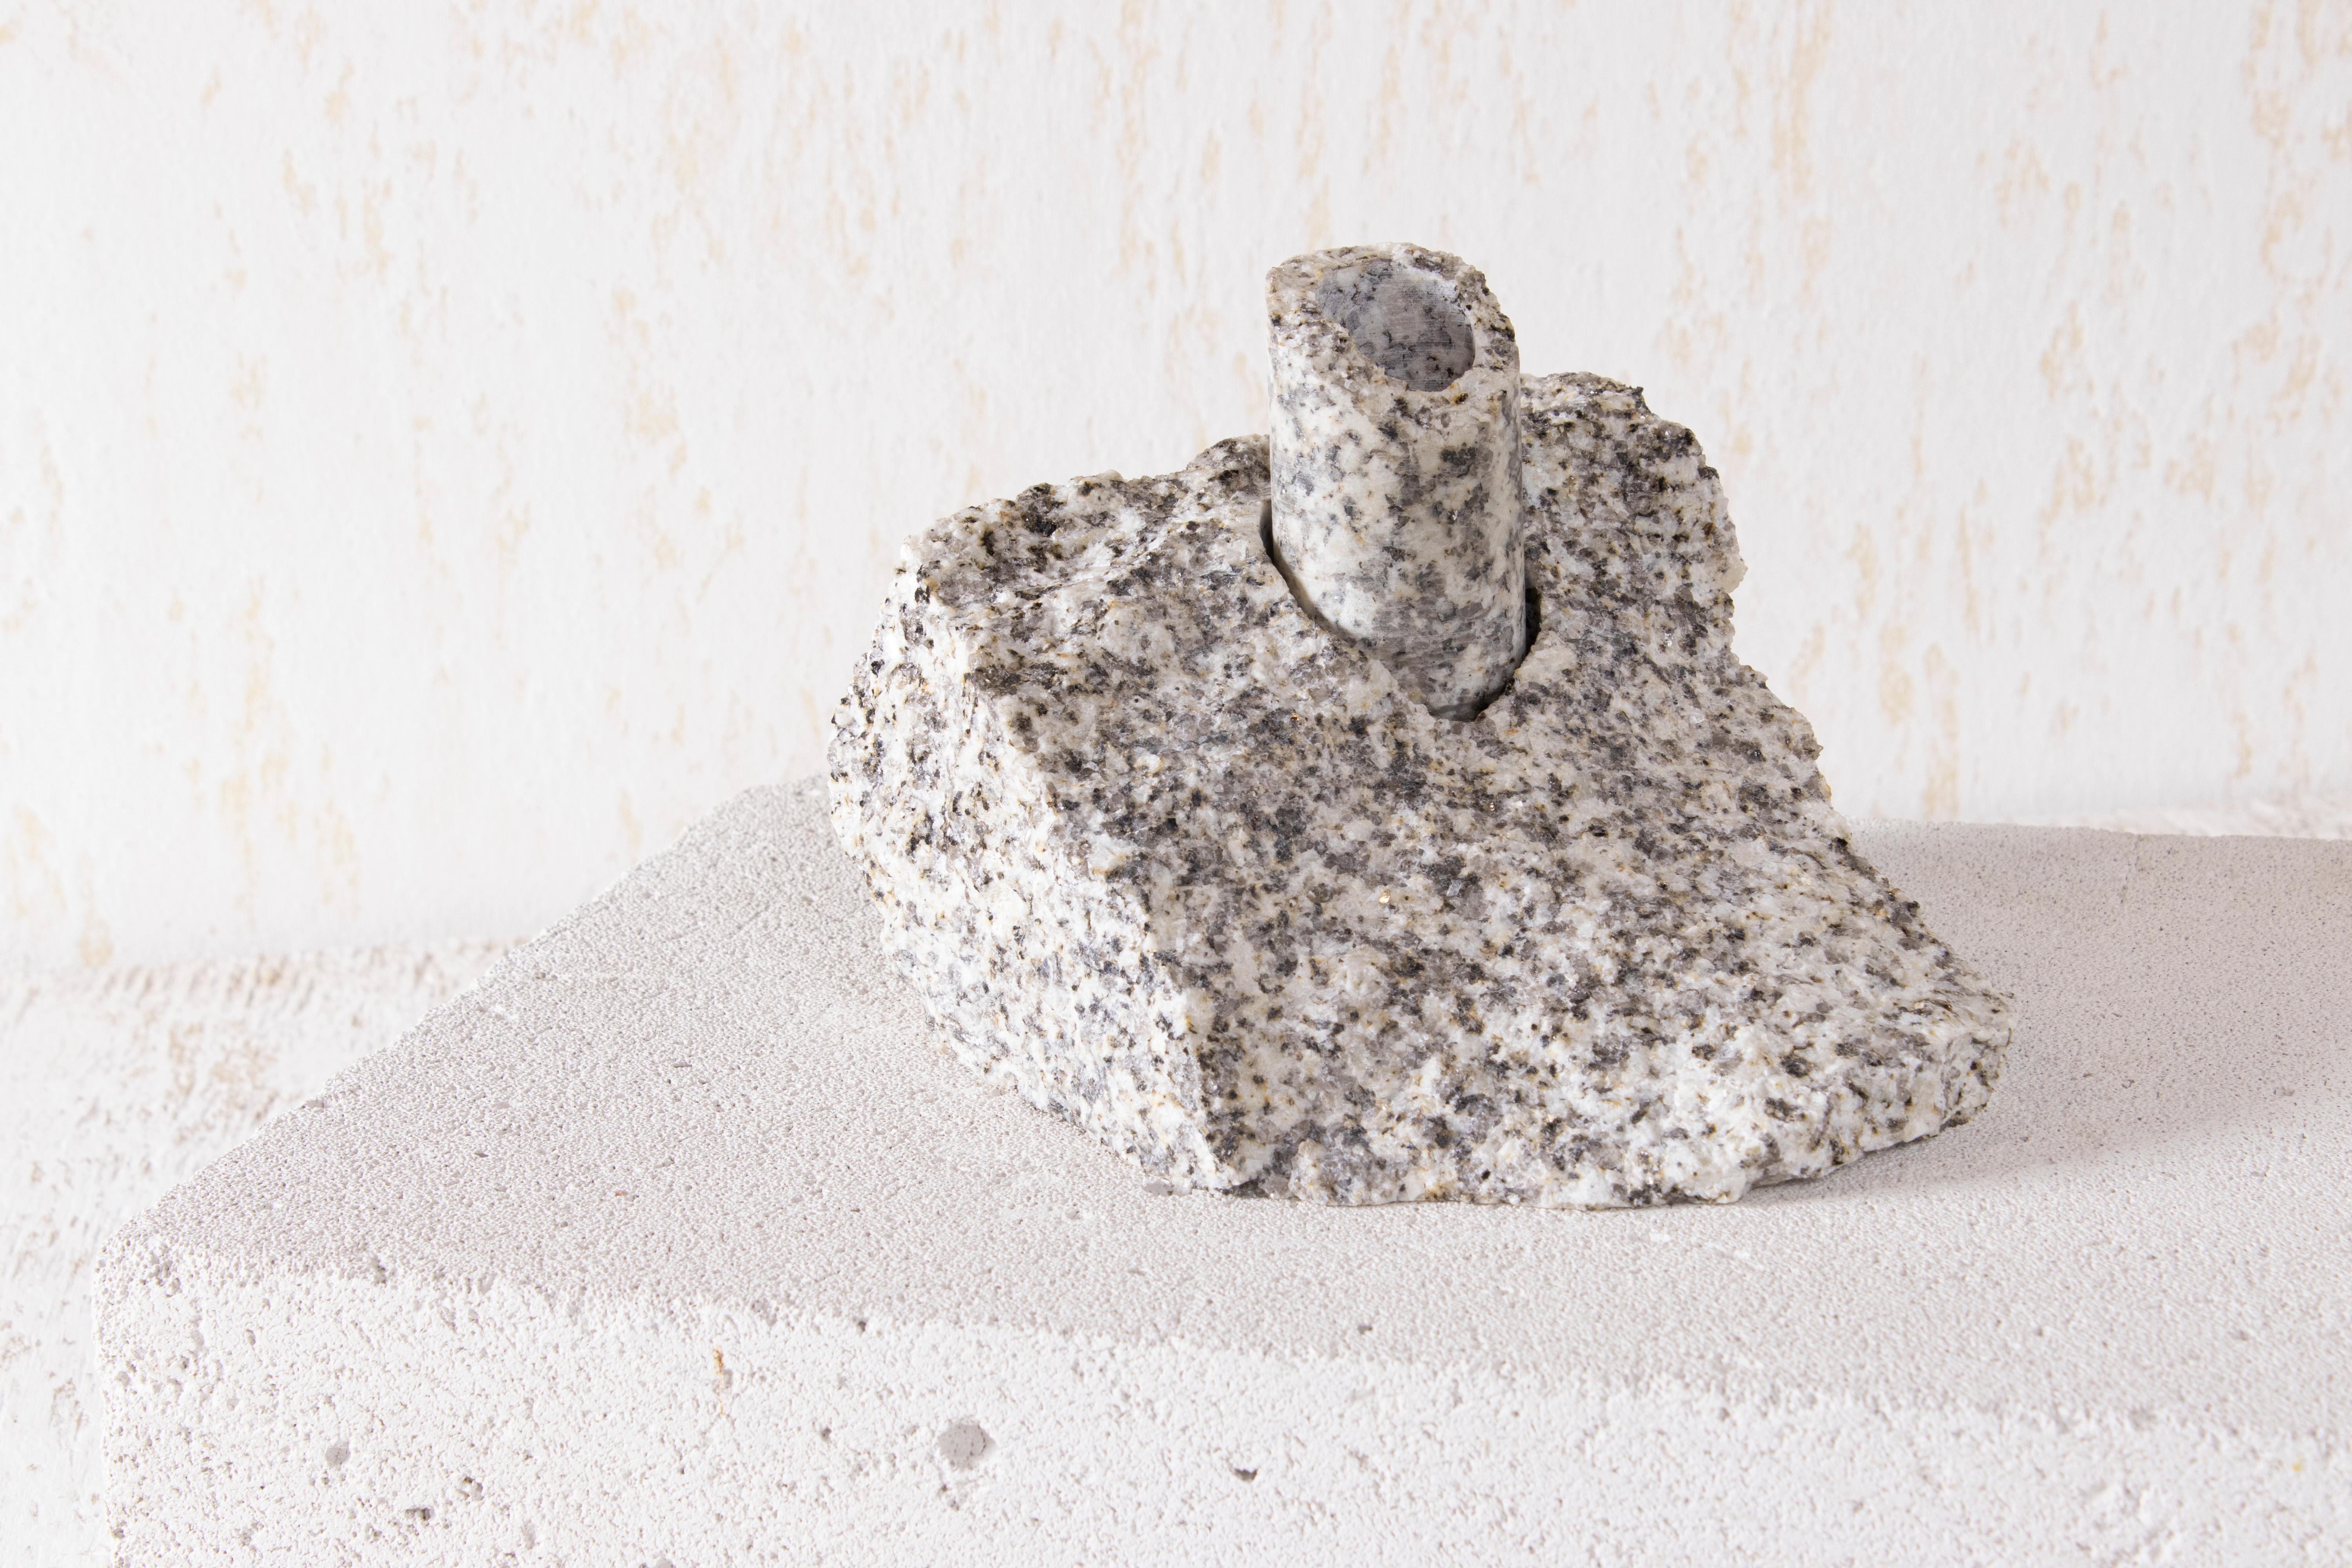 White Granite Abra Candelabra II by Studio DO
Dimensions: D 16 x W 12.5 x H 11.5 cm
Materials: Granite, aluminum.
2 kg.

Stone and fire are connected in an ageless bond. A sparkle created by clashing two stones with each other has been igniting fire